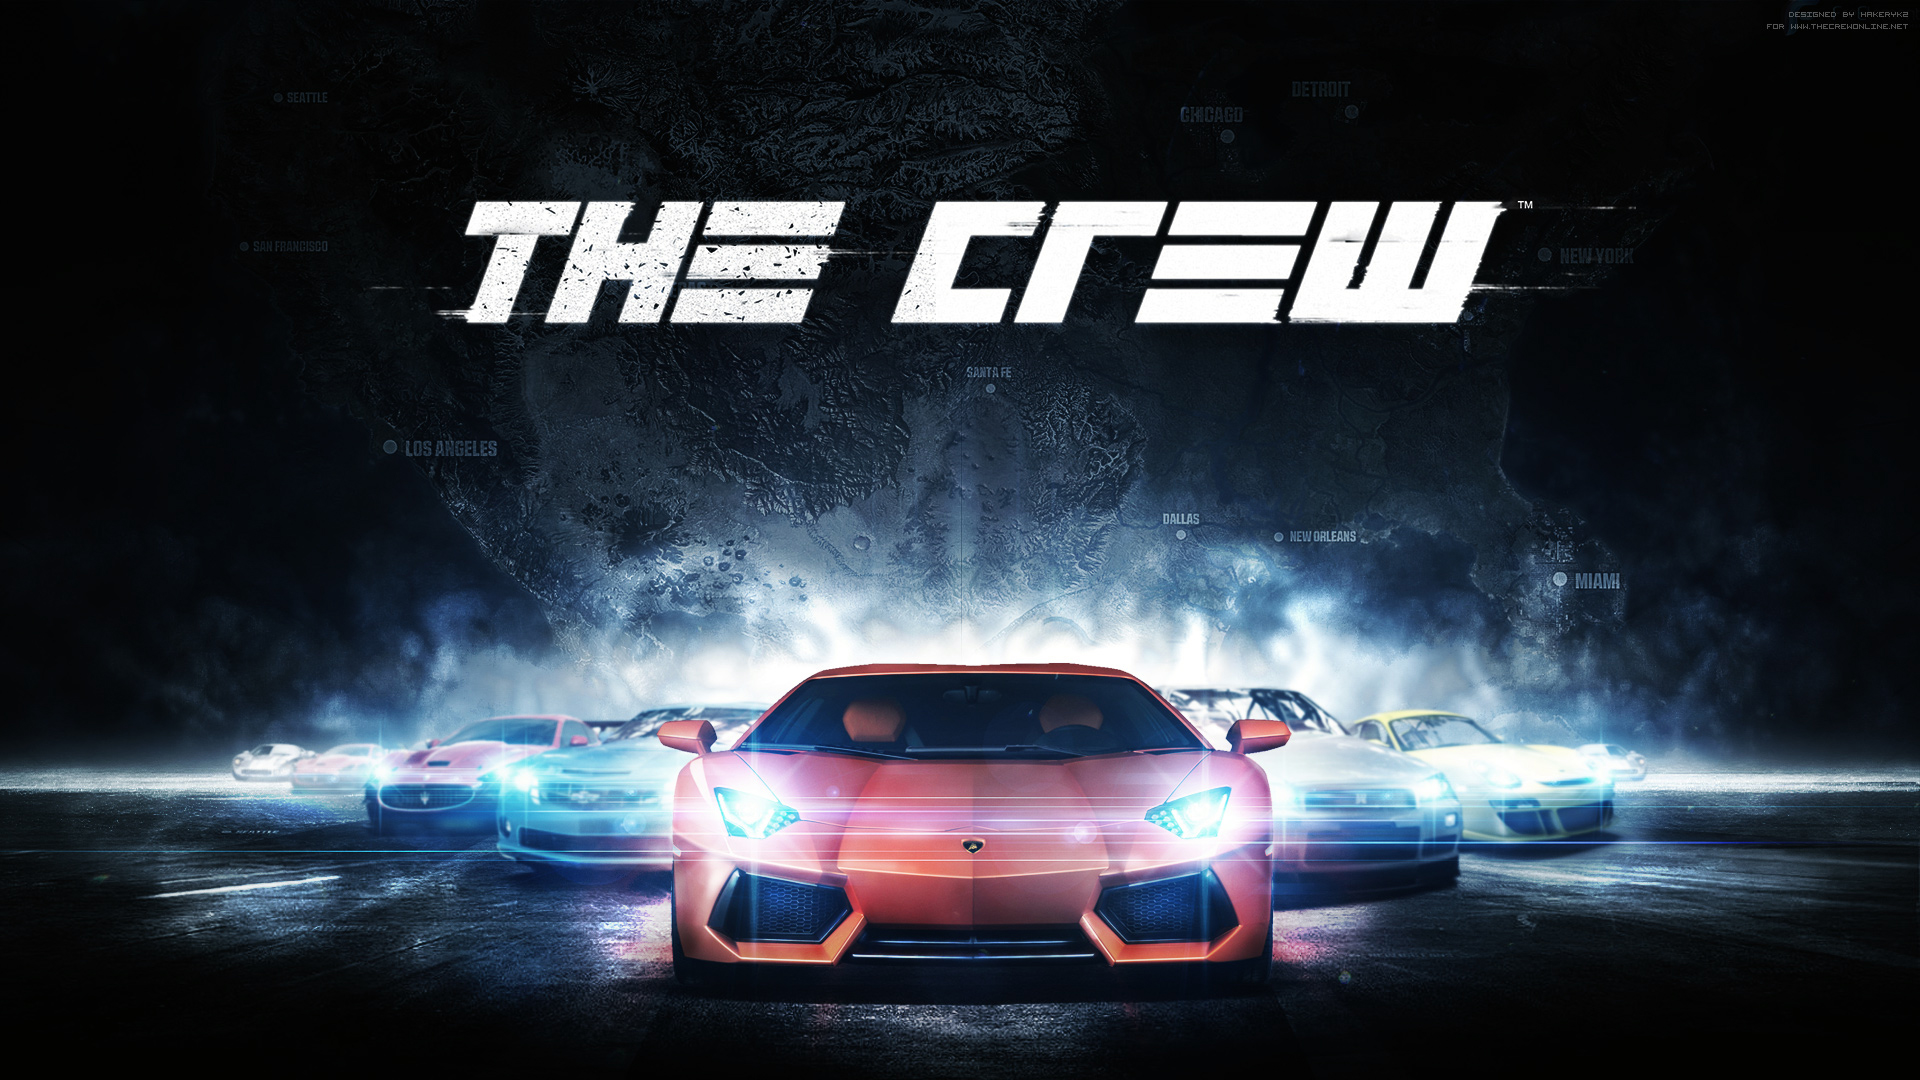 The Crew” Pushed to December